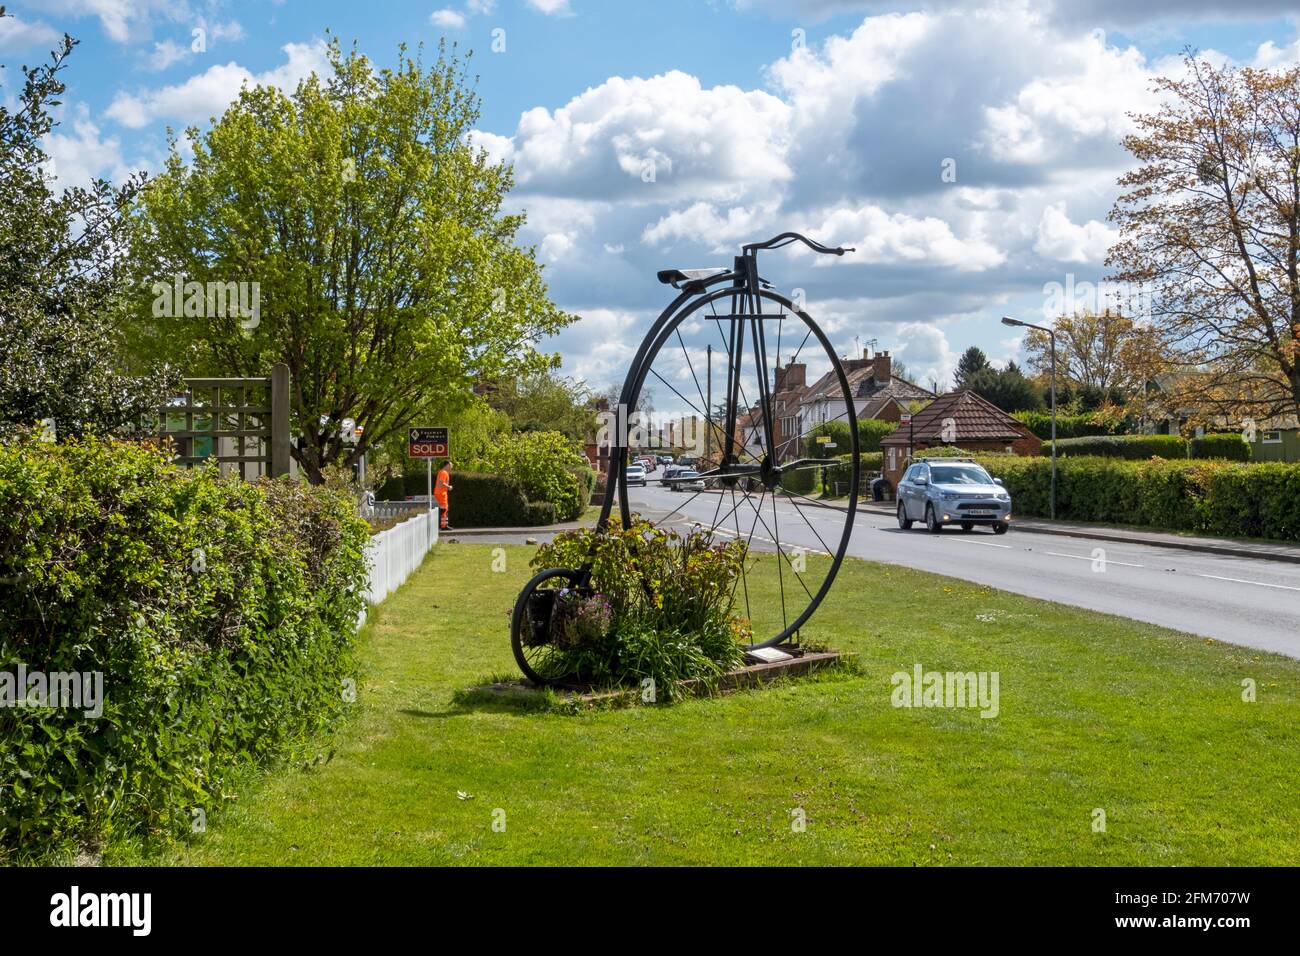 Giant Penny Farthing bicycle at the entrance to Sissinghurst village, to commemorate the Tour de France passing through the village Stock Photo